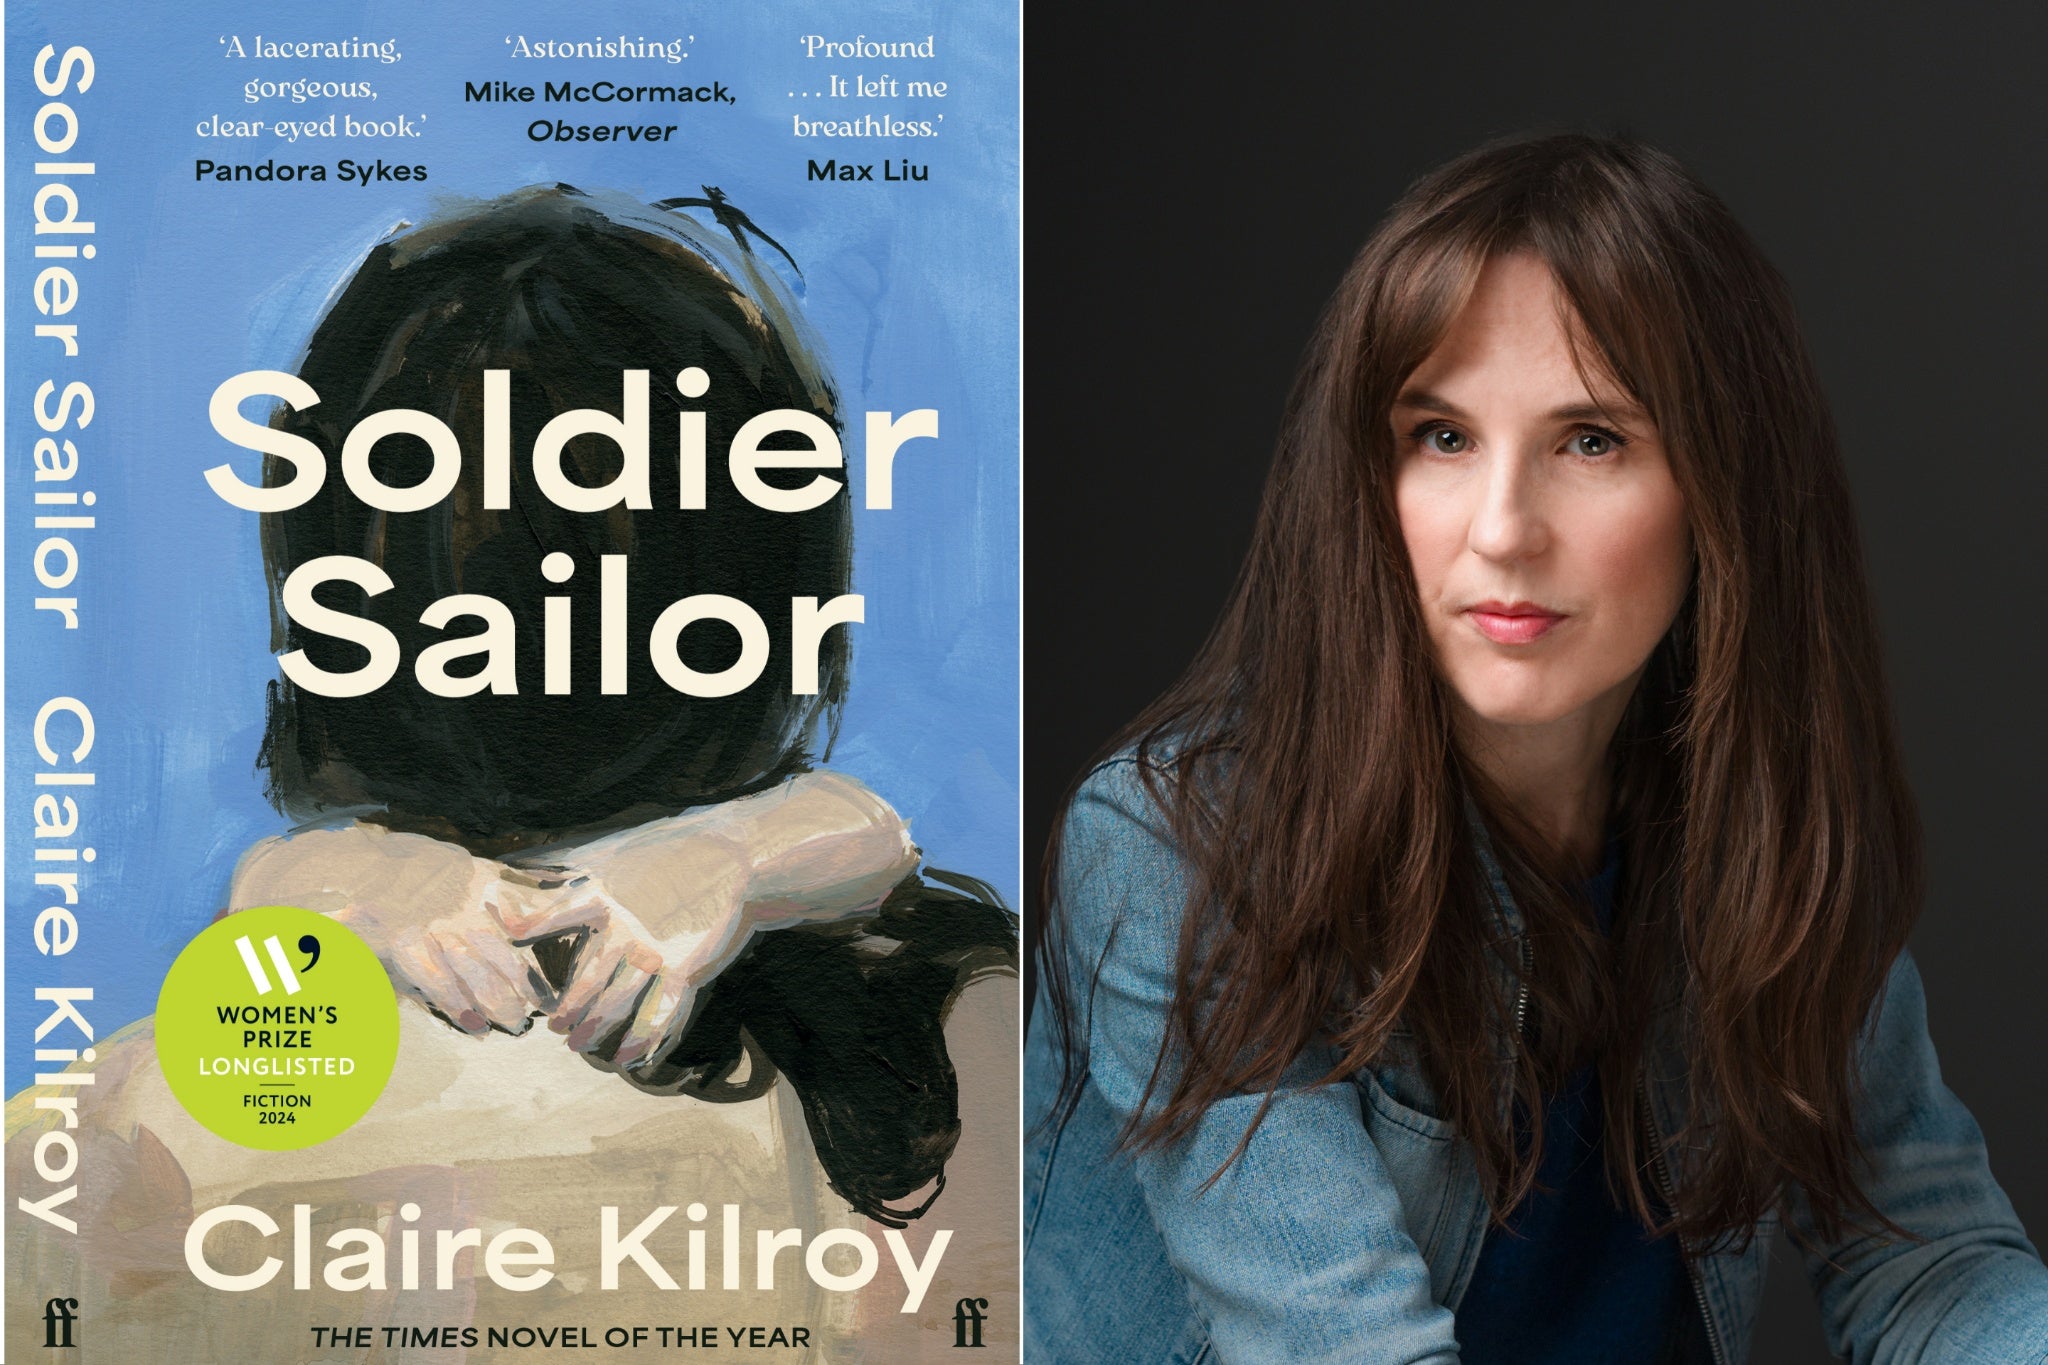 Soldier Sailor and its author, Claire Kilroy